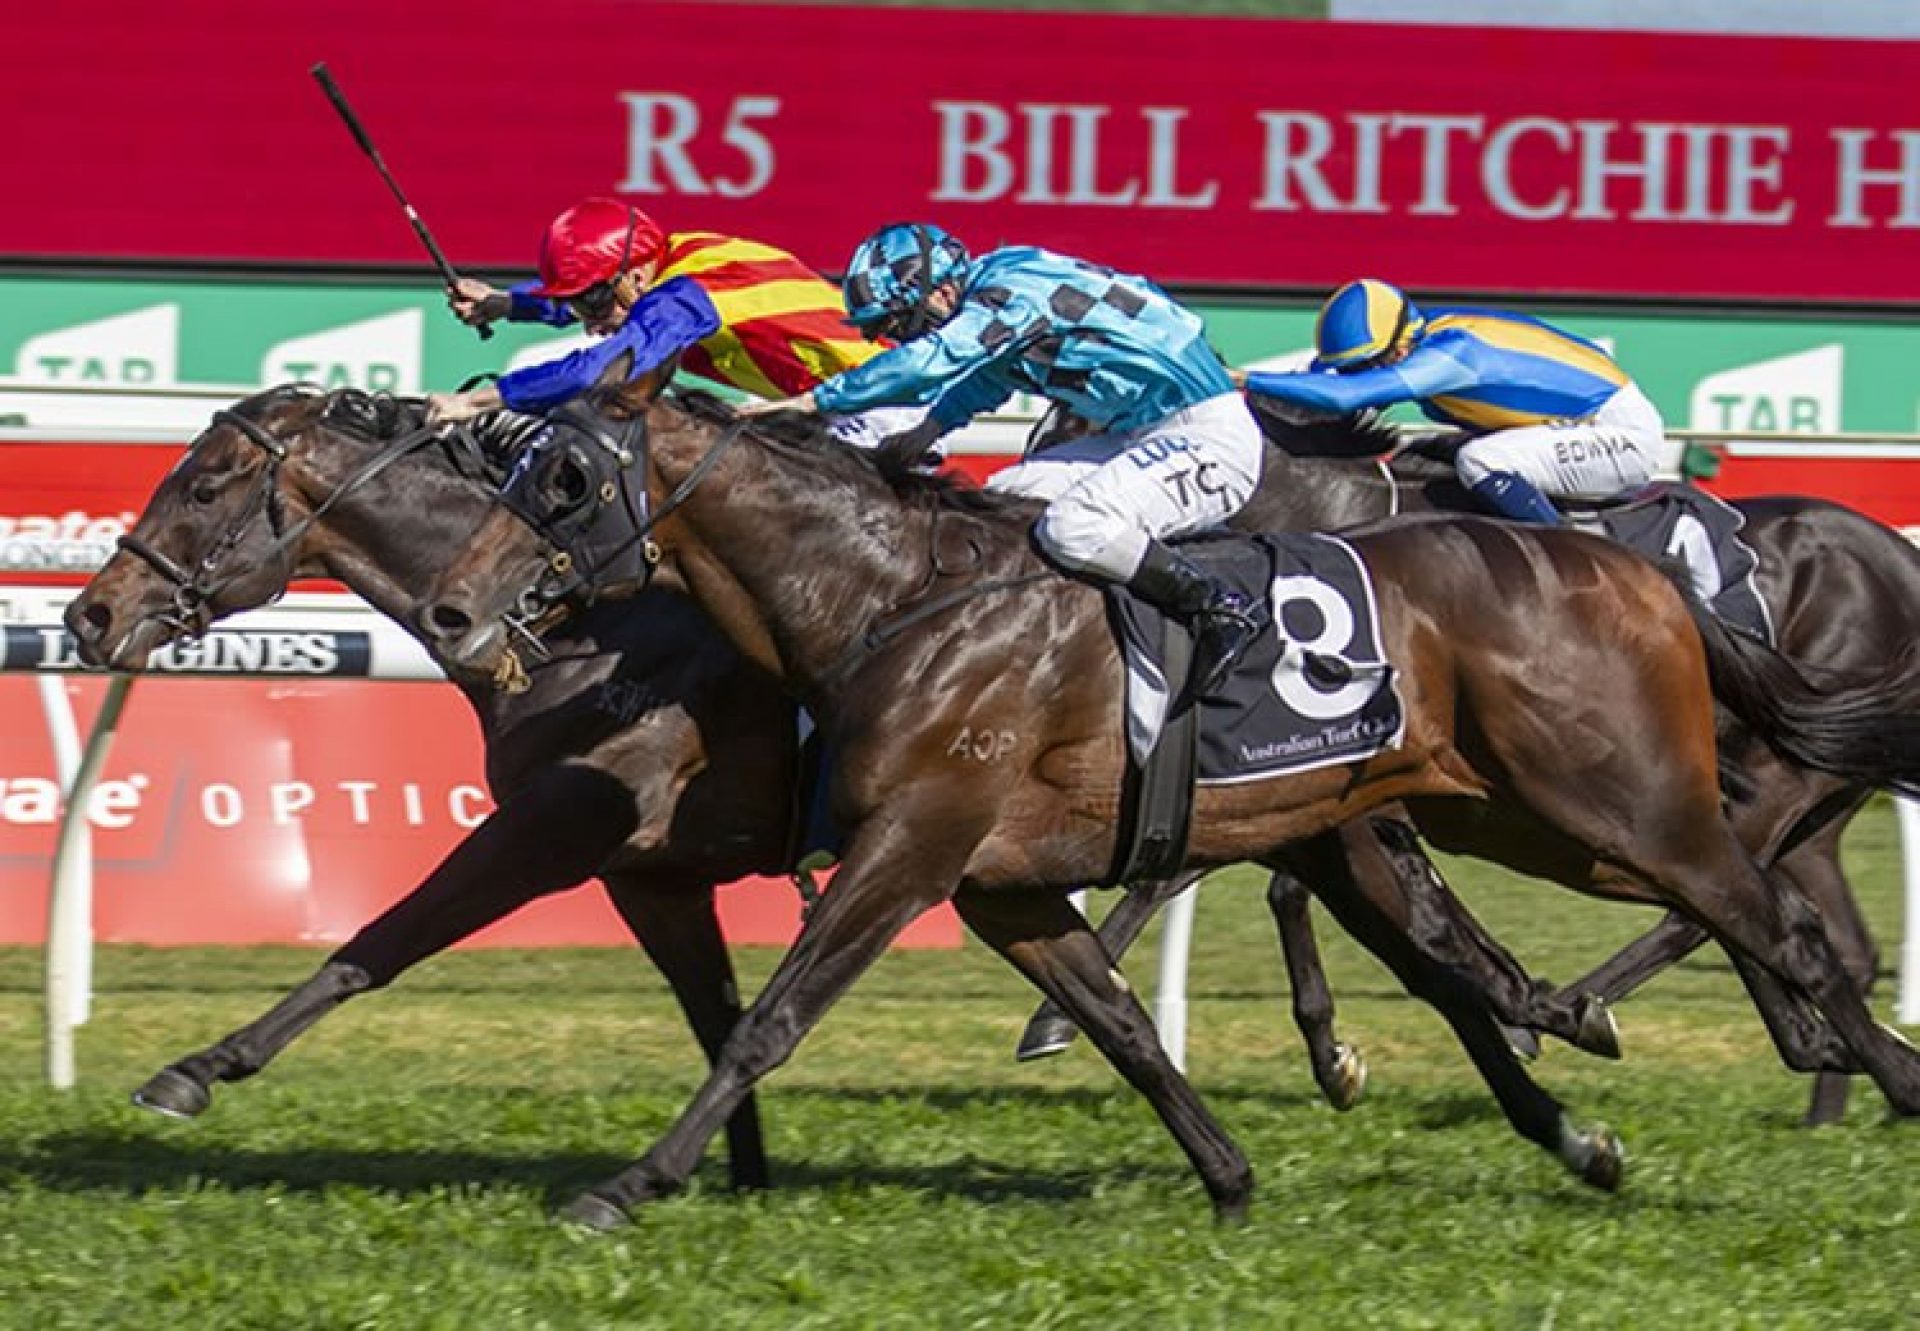 Seige Of Quebec (Fastnet Rock) winning the G3 ATC Bill Ritchie Stakes at Randwick